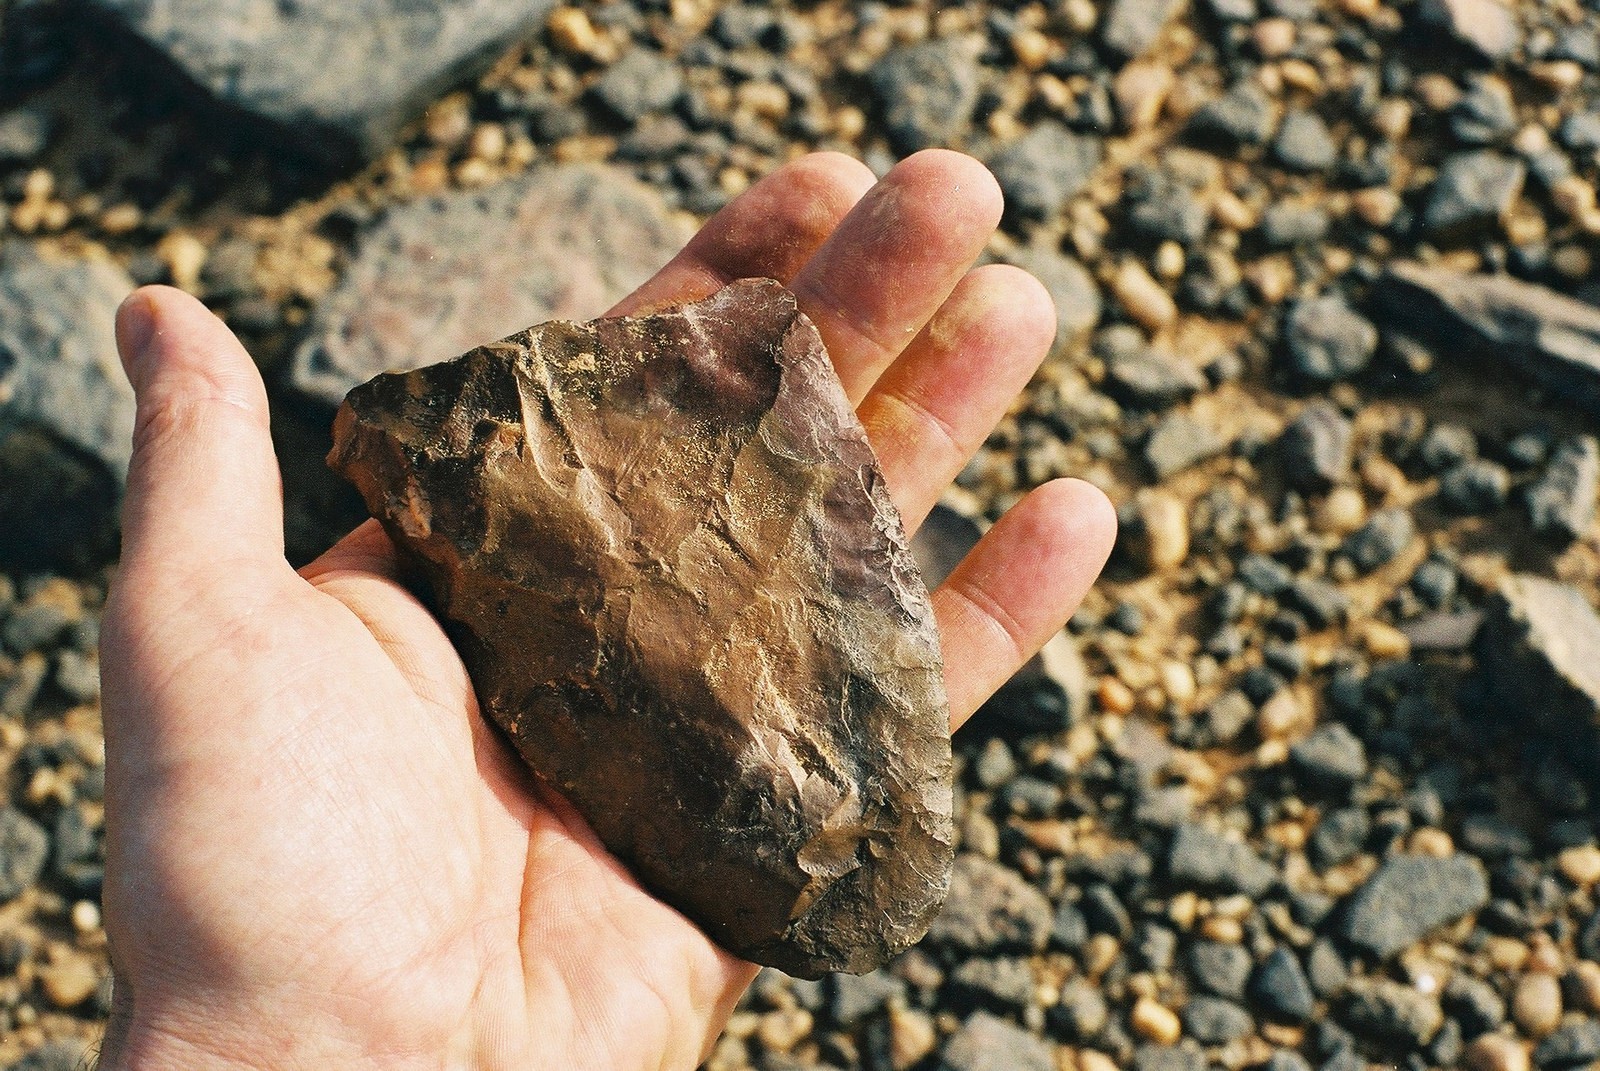 A hand holding a triangular stone tool, which was made millions of years ago.